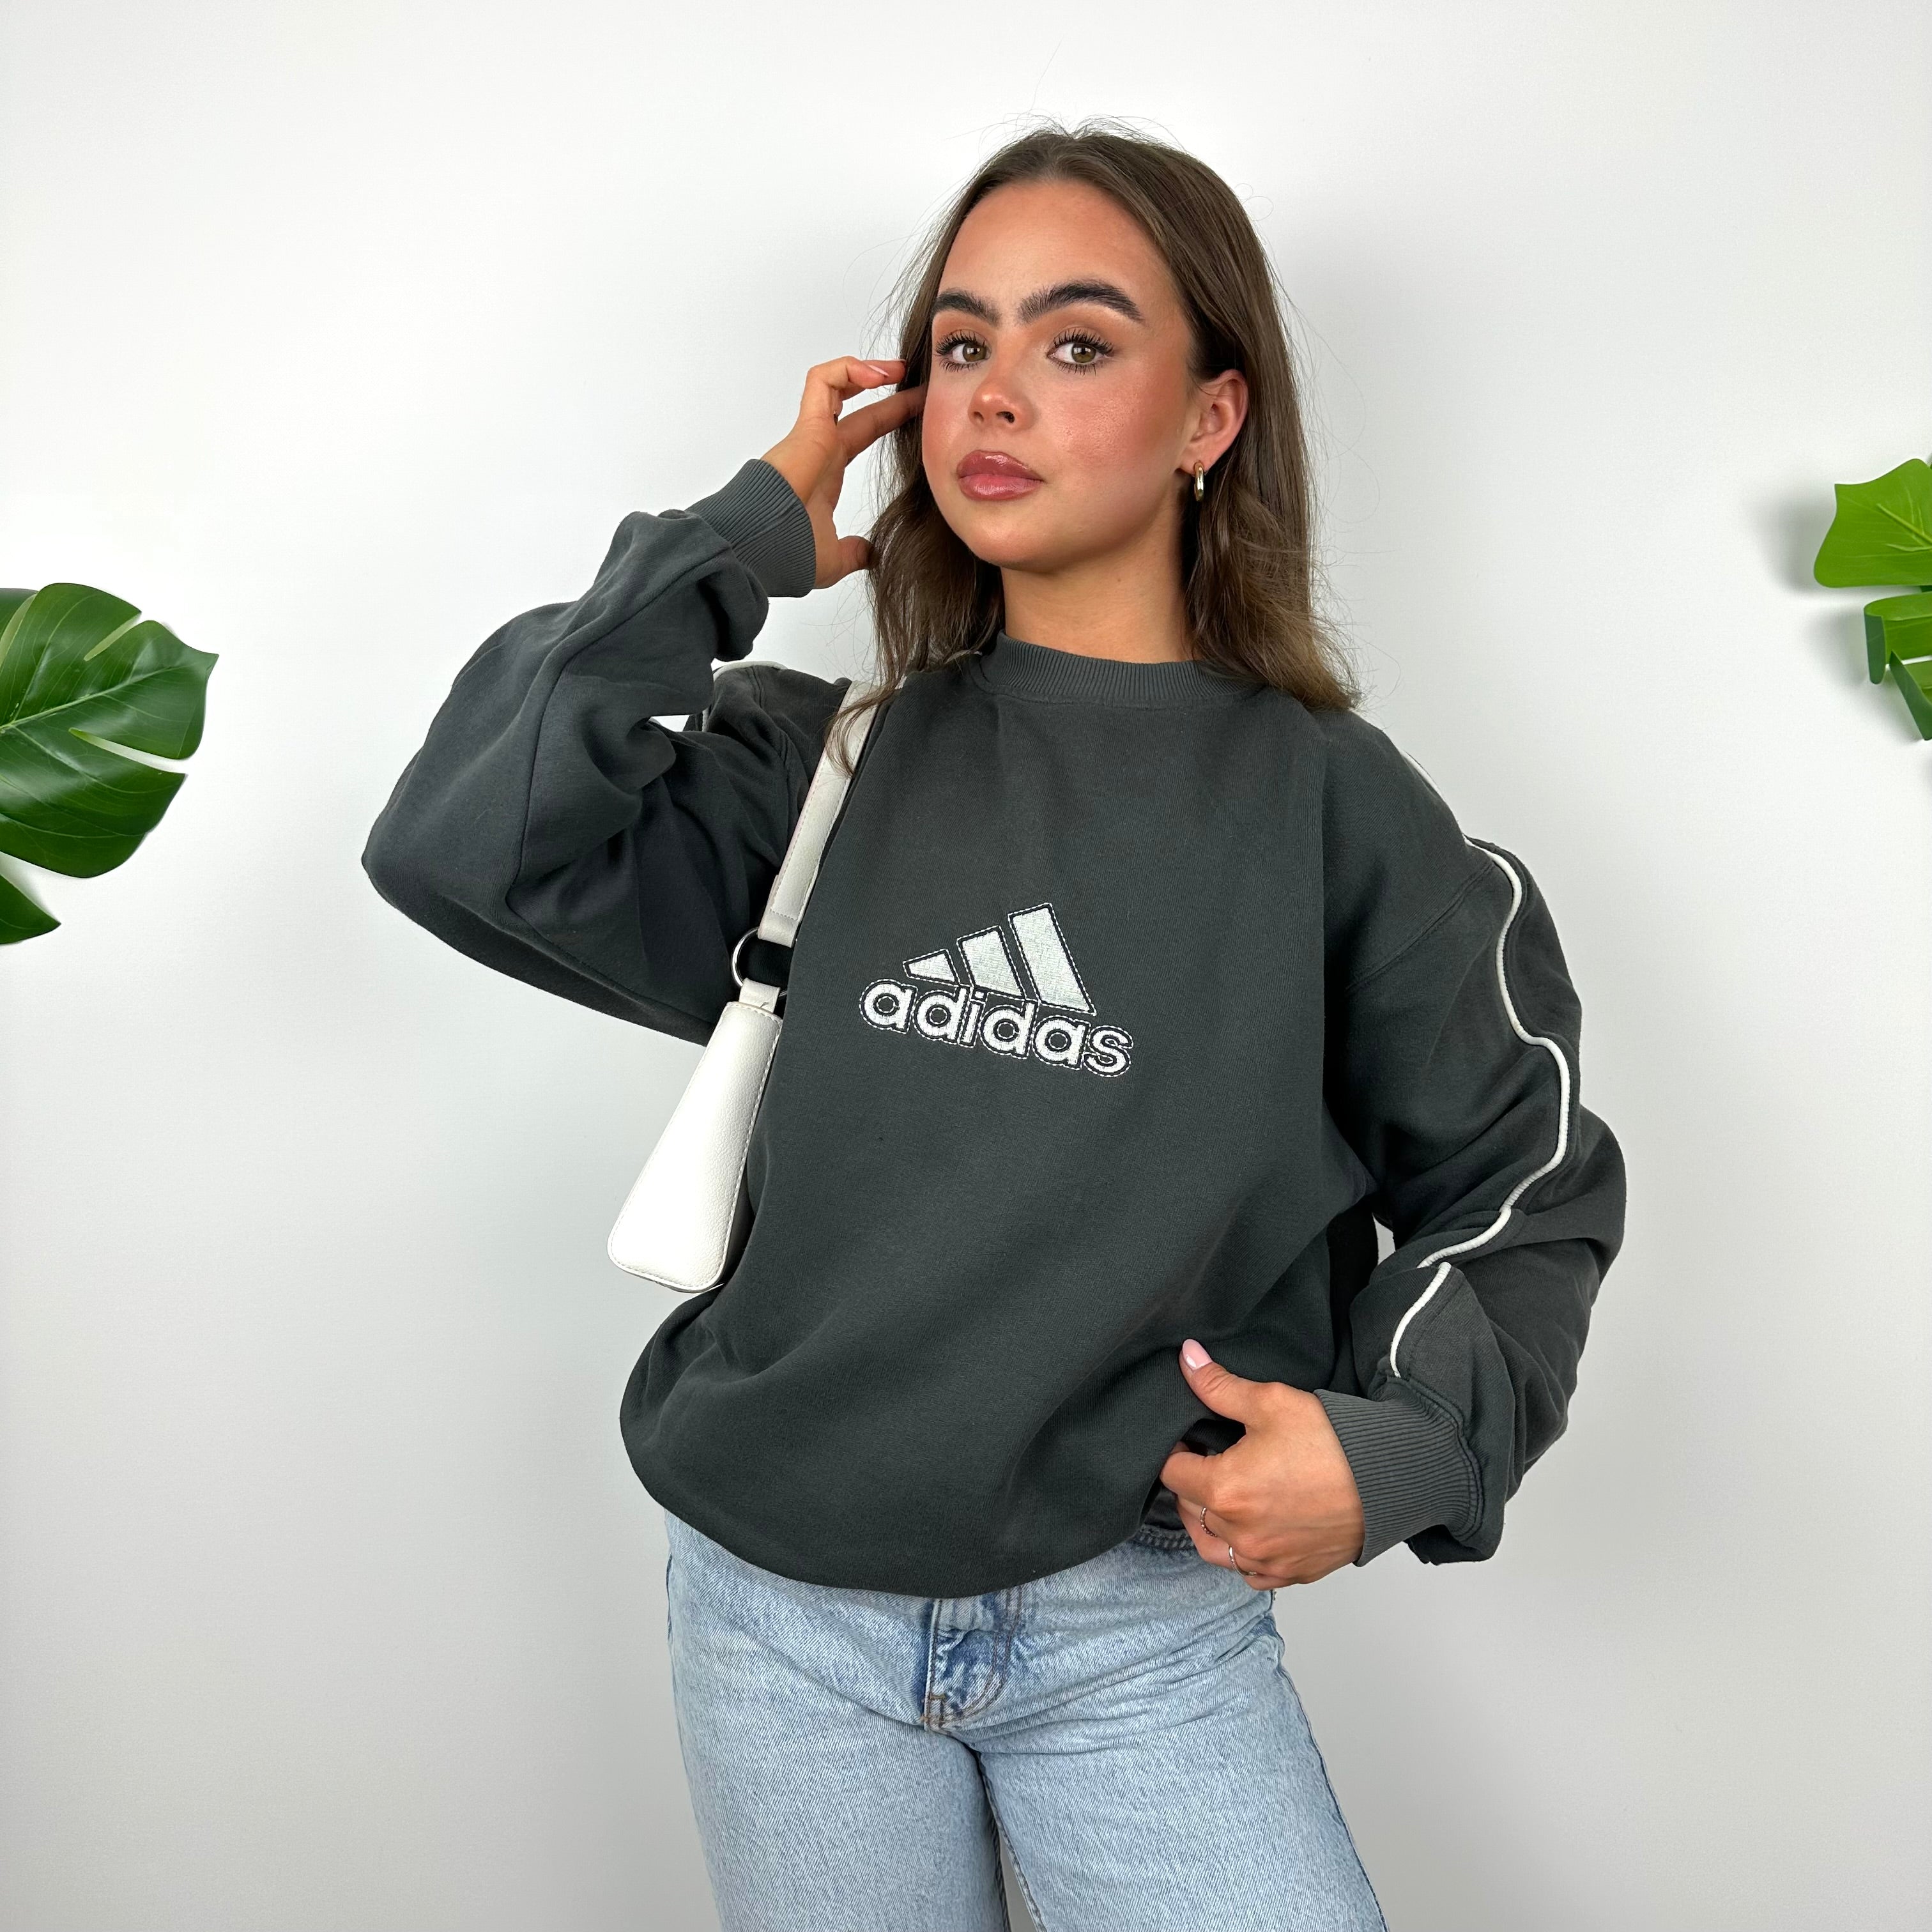 Adidas Grey Embroidered Spell Out Sweatshirt (M)